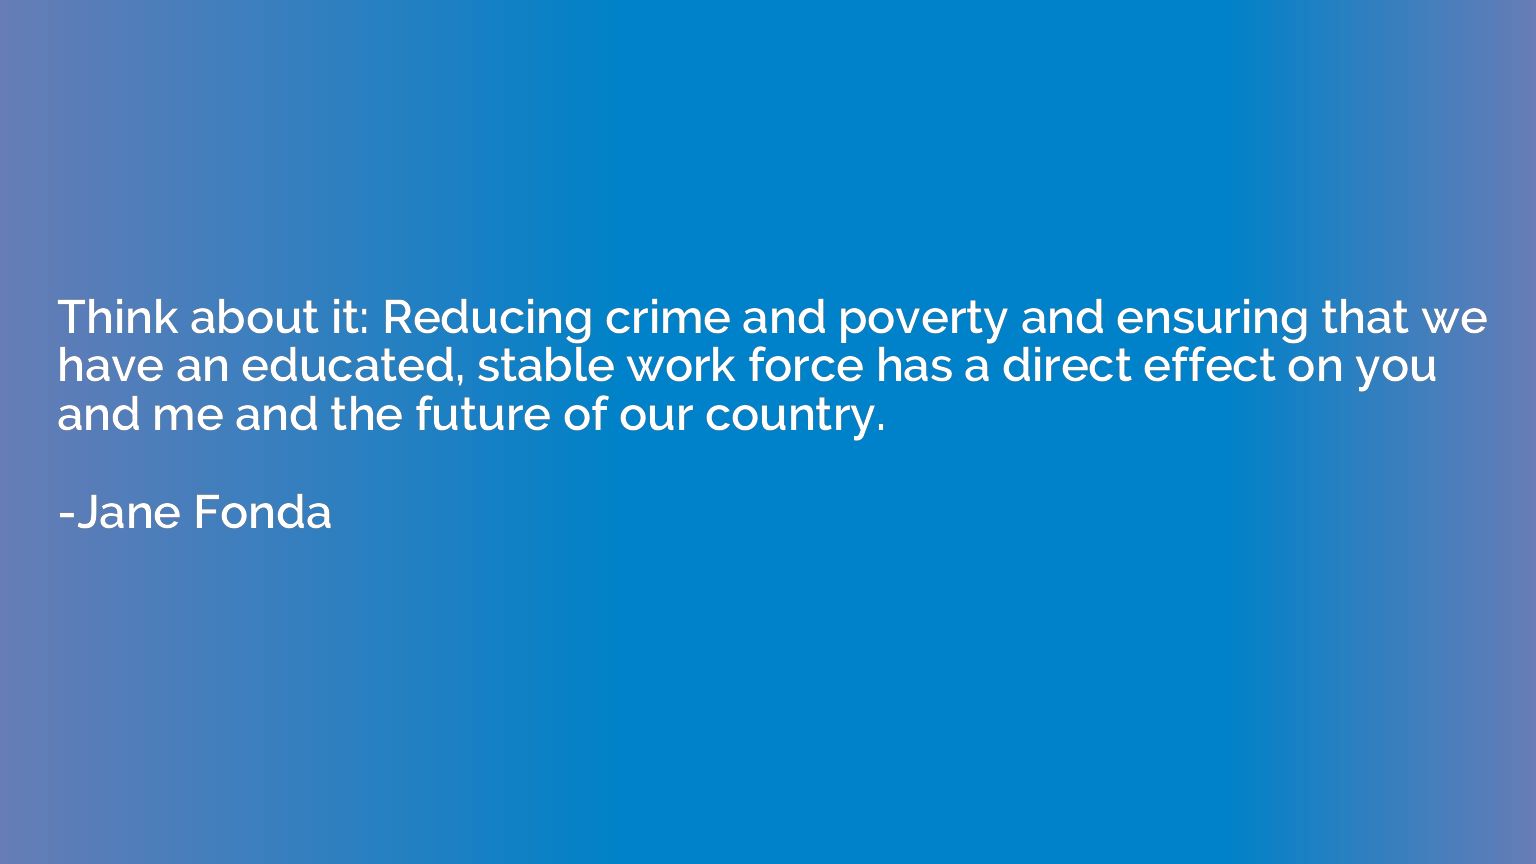 Think about it: Reducing crime and poverty and ensuring that